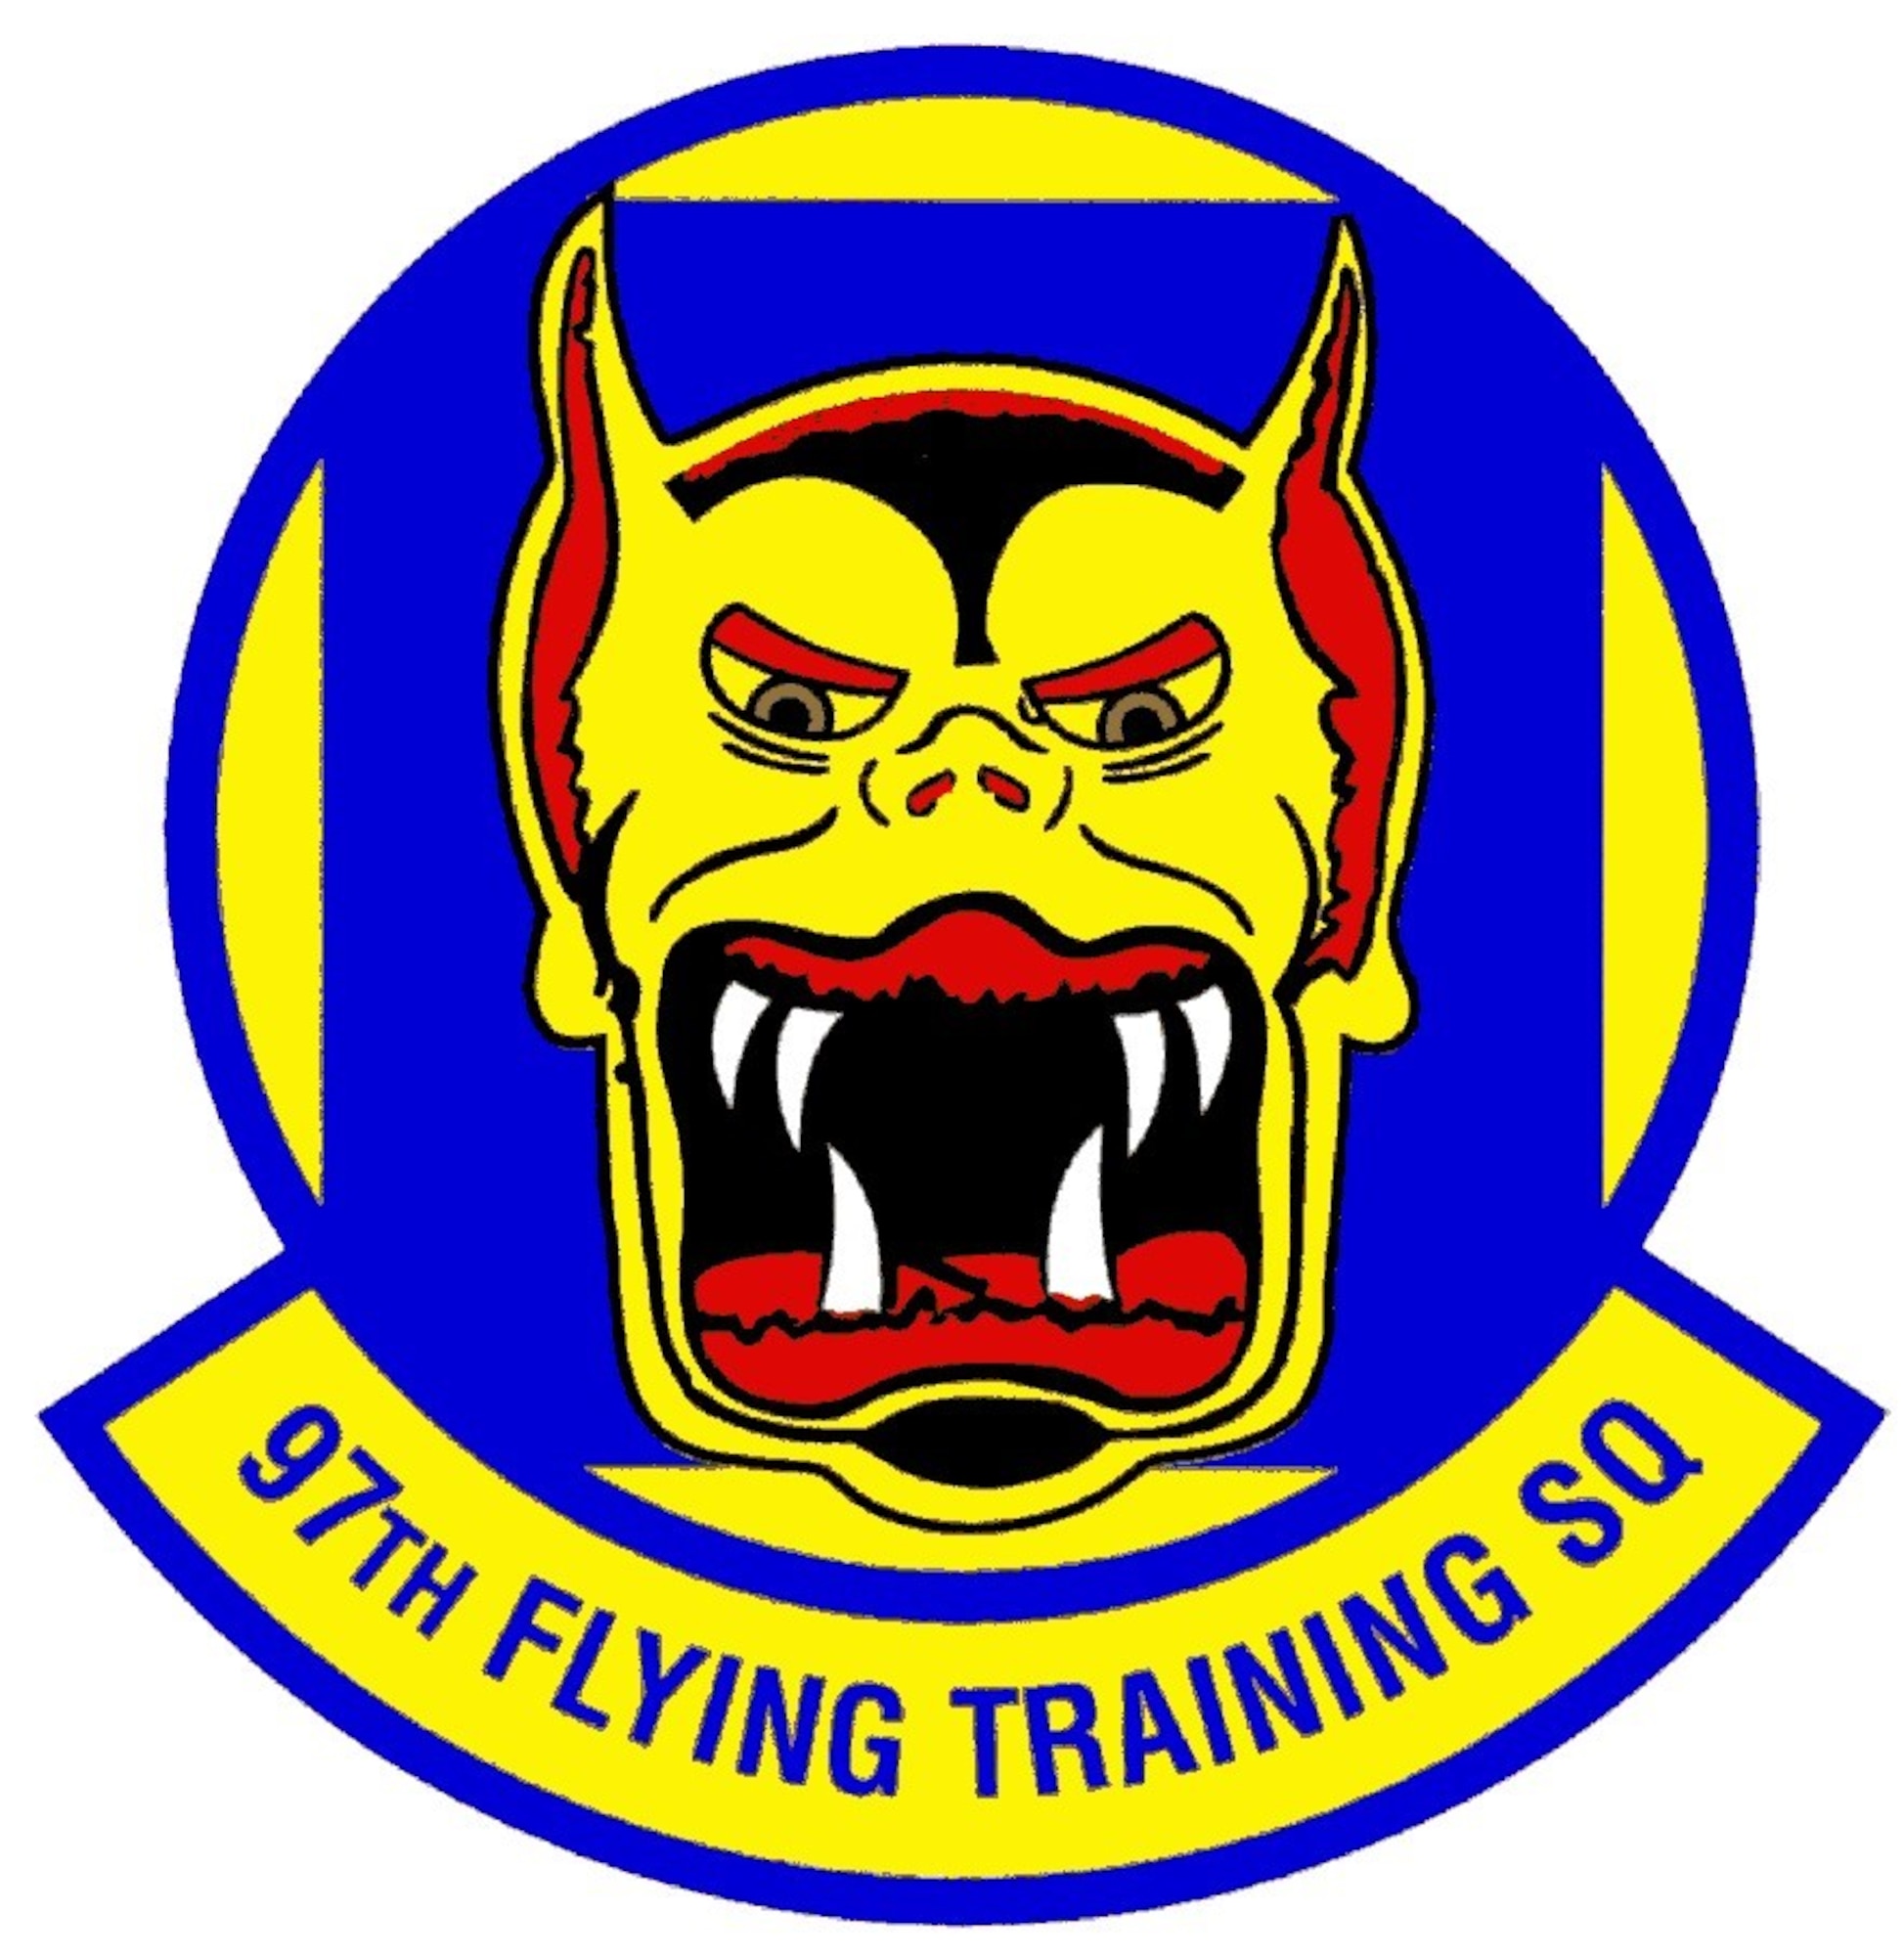 The 97 FTS emblem is the stylized face of a Devil Cat, trimmed in red and black with white tusks and green eyes on a blue background. The Devil Cat, neither cat nor wolf, has roamed the steppes of Asiatic Russia for generations. Its awesome appearance is but mildly indicative of the beast’s true ferocity, of its almost diabolical wiliness and daring. In all of central and northern Asia, no animal real or legendary excites a greater respect or fear among the hardened and barbaric peoples of this vast hinterland. The Devil Cat portrays the endurance, courage, resourcefulness and ferocity, which the 97 FTS emulates.